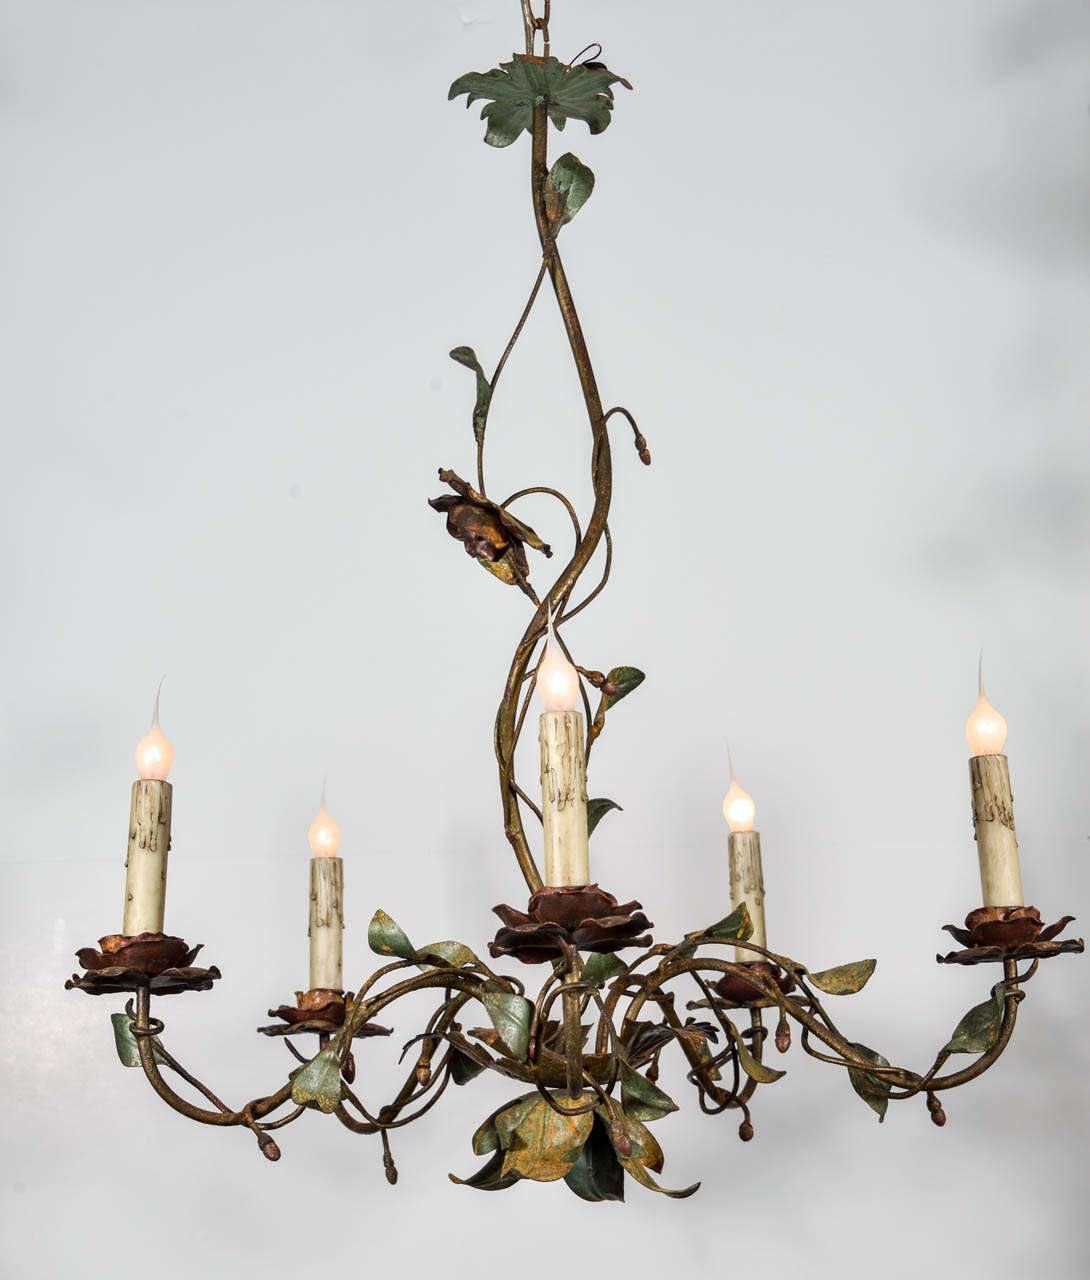 Vintage tole chandelier with floral motif featuring elegantly time-worn painted and gilt details and a beautiful patina. Newly-wired with five gracefully curved arms supporting flower-shape bobeches, four feet of additional chain and a simple canopy.